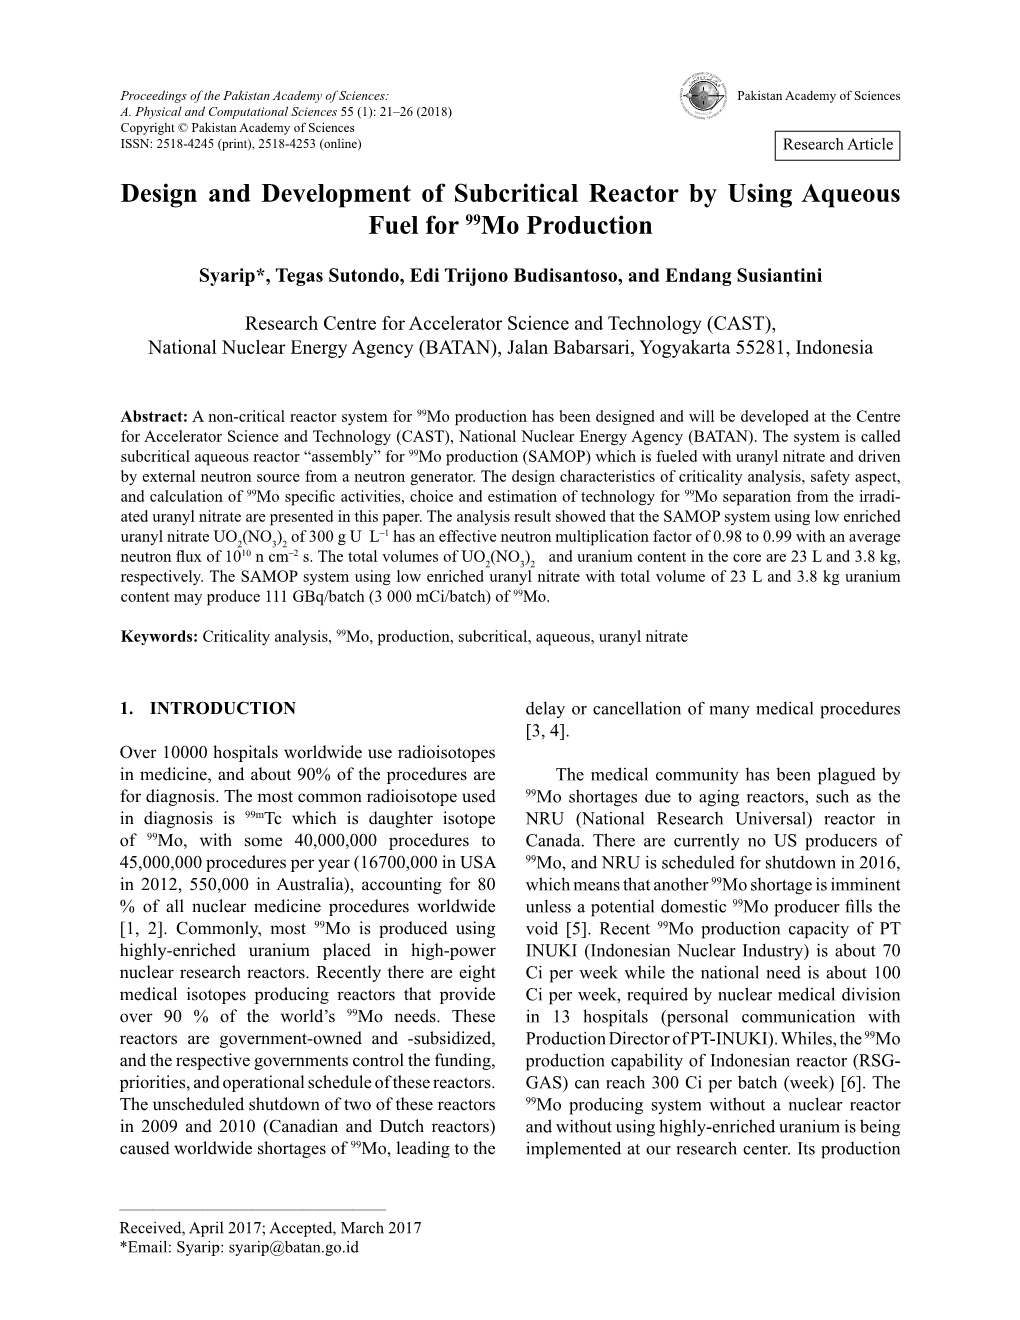 Design and Development of Subcritical Reactor by Using Aqueous Fuel for 99Mo Production